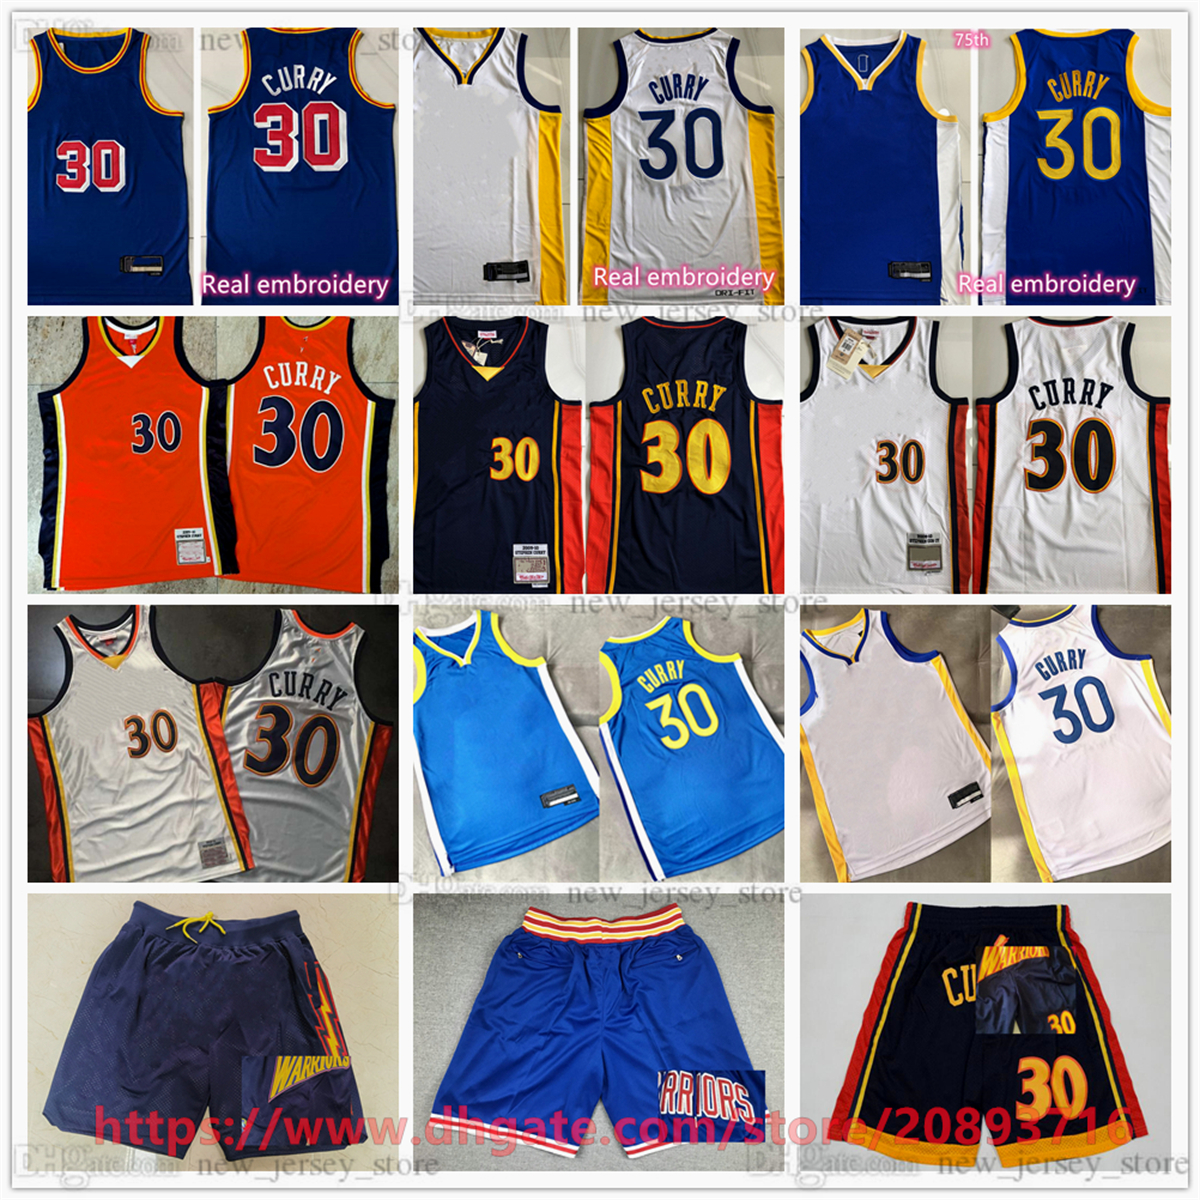 Mitchell et Ness Authentique Broderie Basketball 30 StephenCurry Maillots Rétro Bleu Orange Blanc 2009-10 Respirant Sport Real Stitched Quality Jersey Shorts